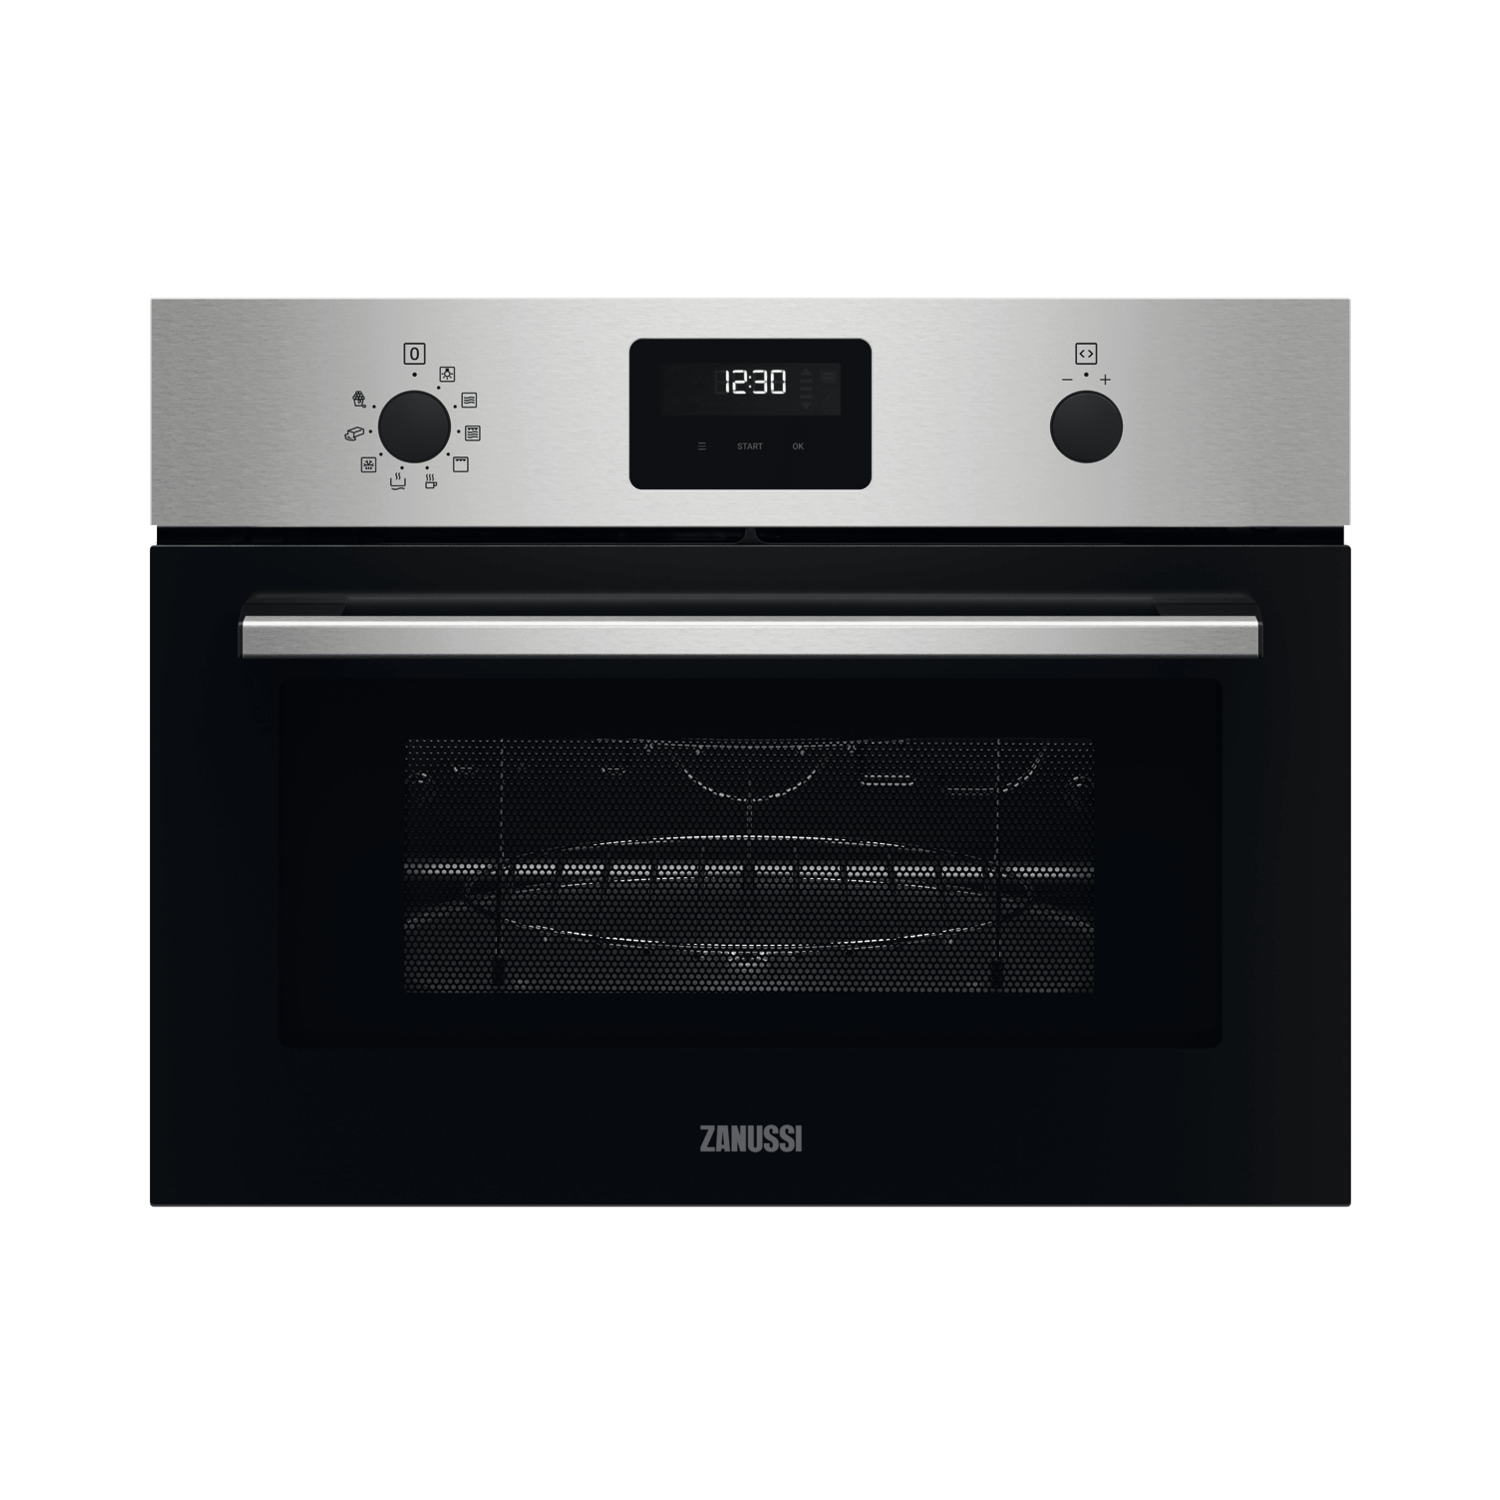 Zanussi Series 40 MicroMax 43L 1000W Built in Compact Microwave with Grill - Stainless Steel